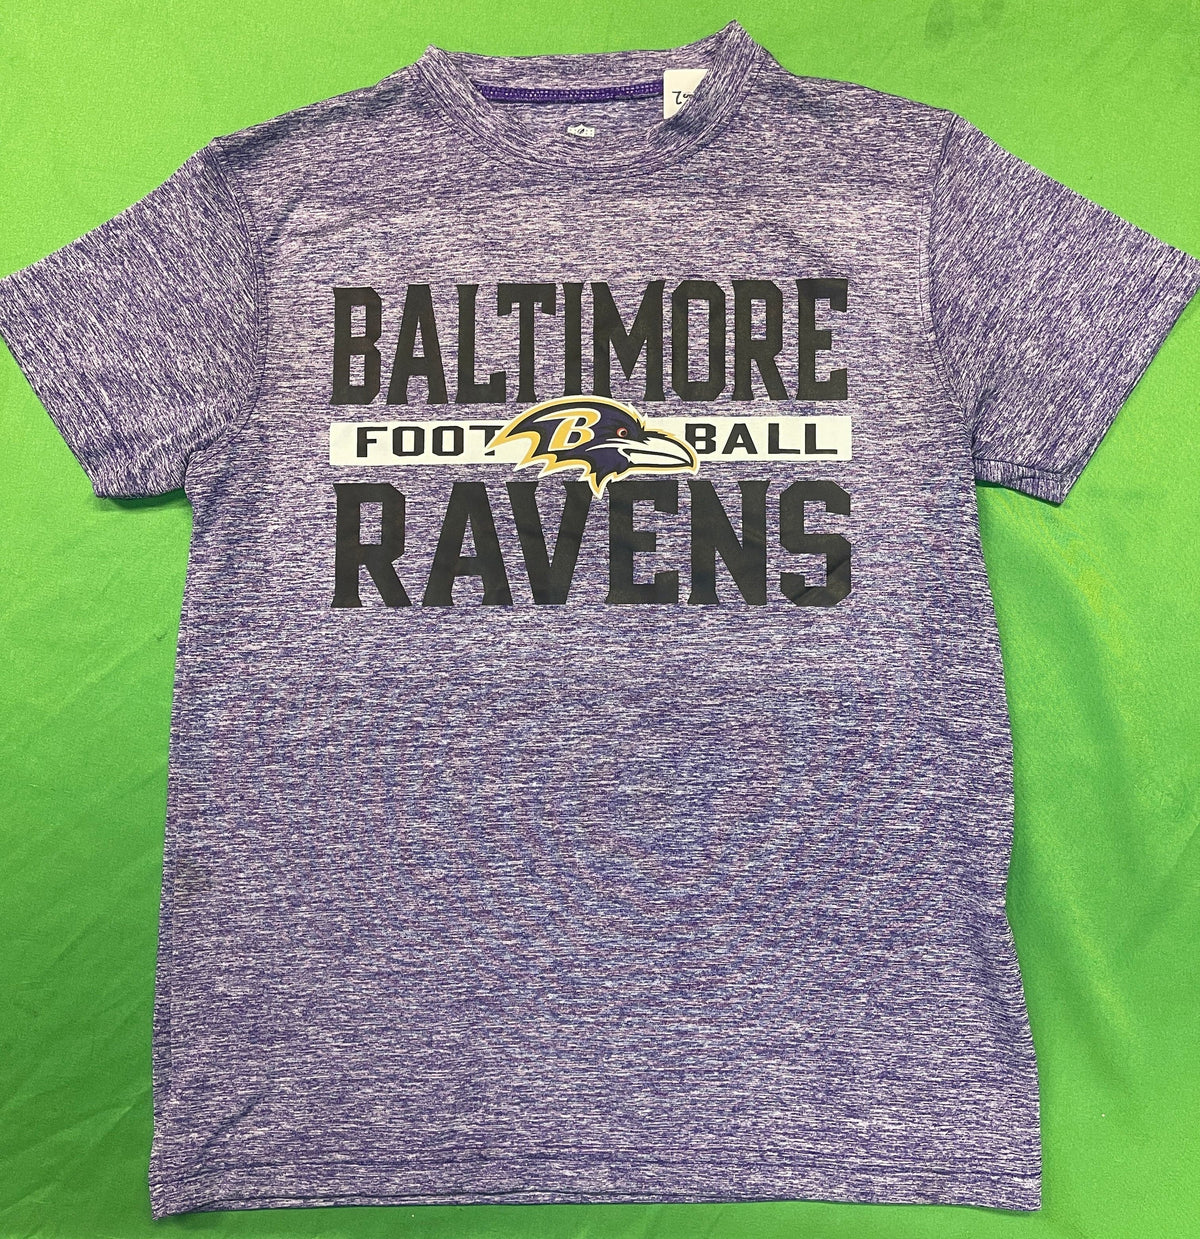 NFL Baltimore Ravens Heathered Purple T-Shirt Youth Small 8